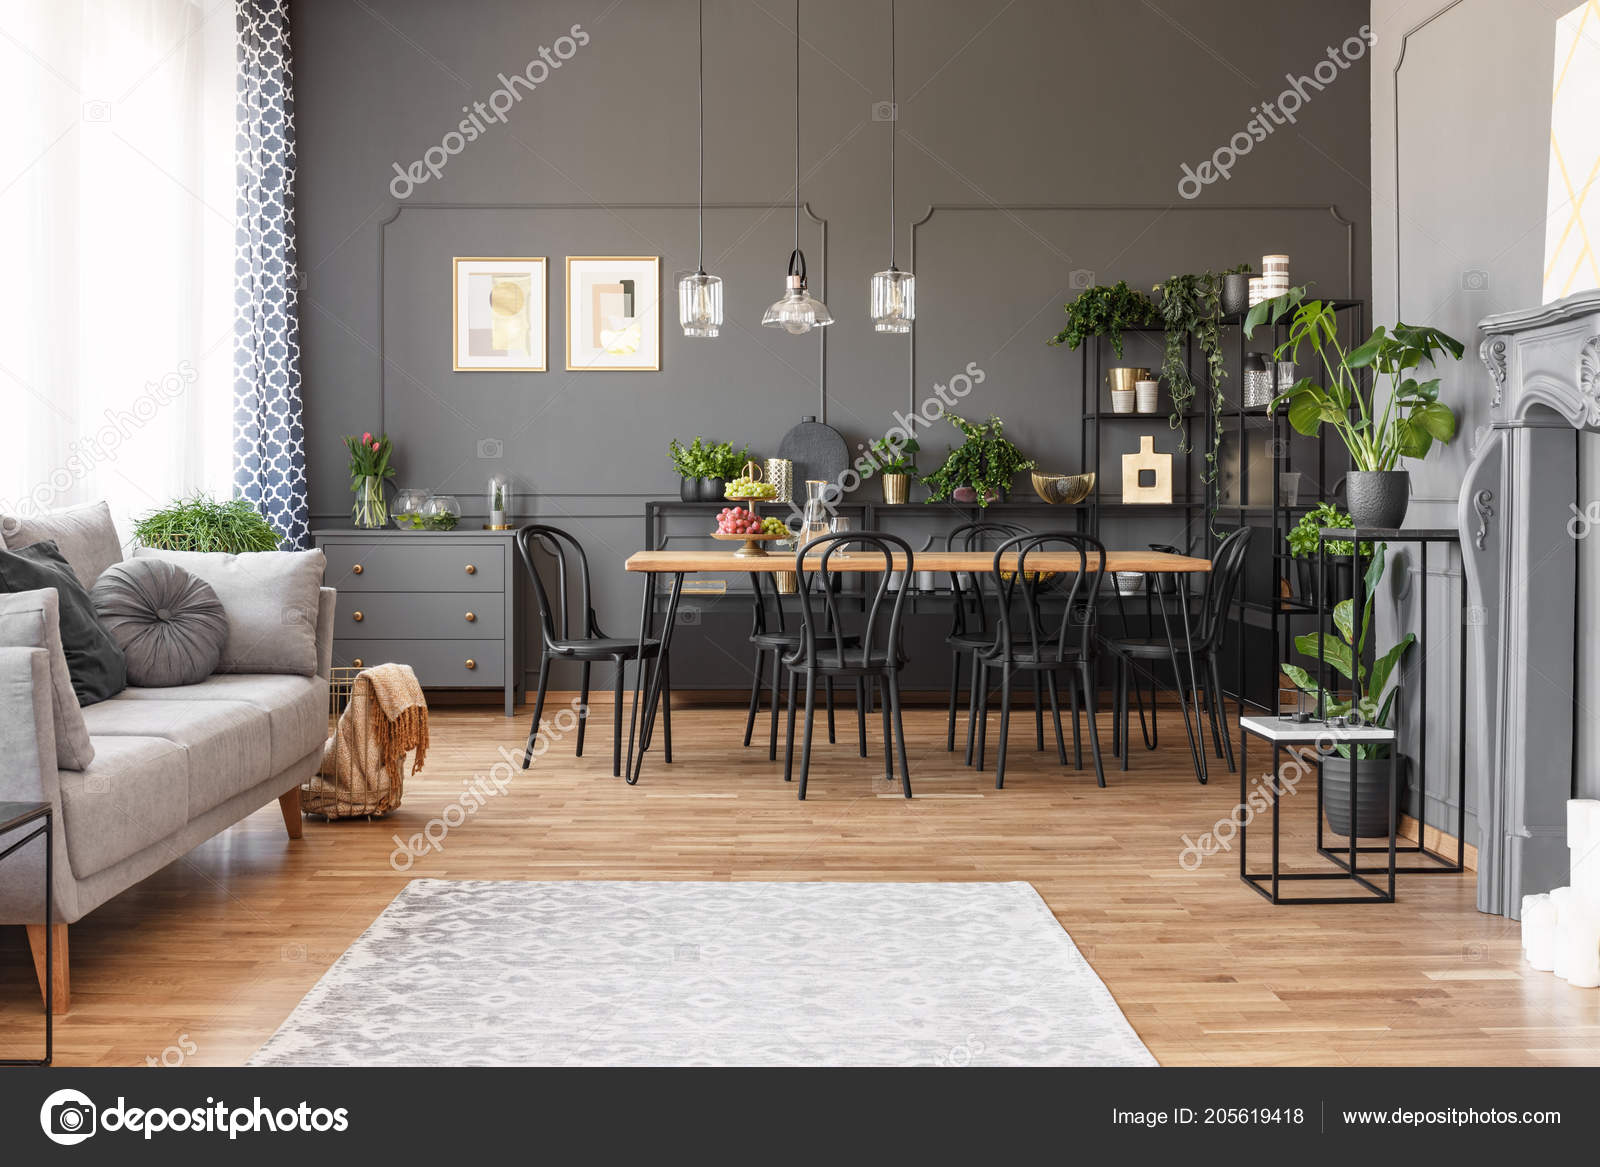 Spacious Flat Interior Gray Sofa Wooden Dining Table Black Chairs Stock Photo